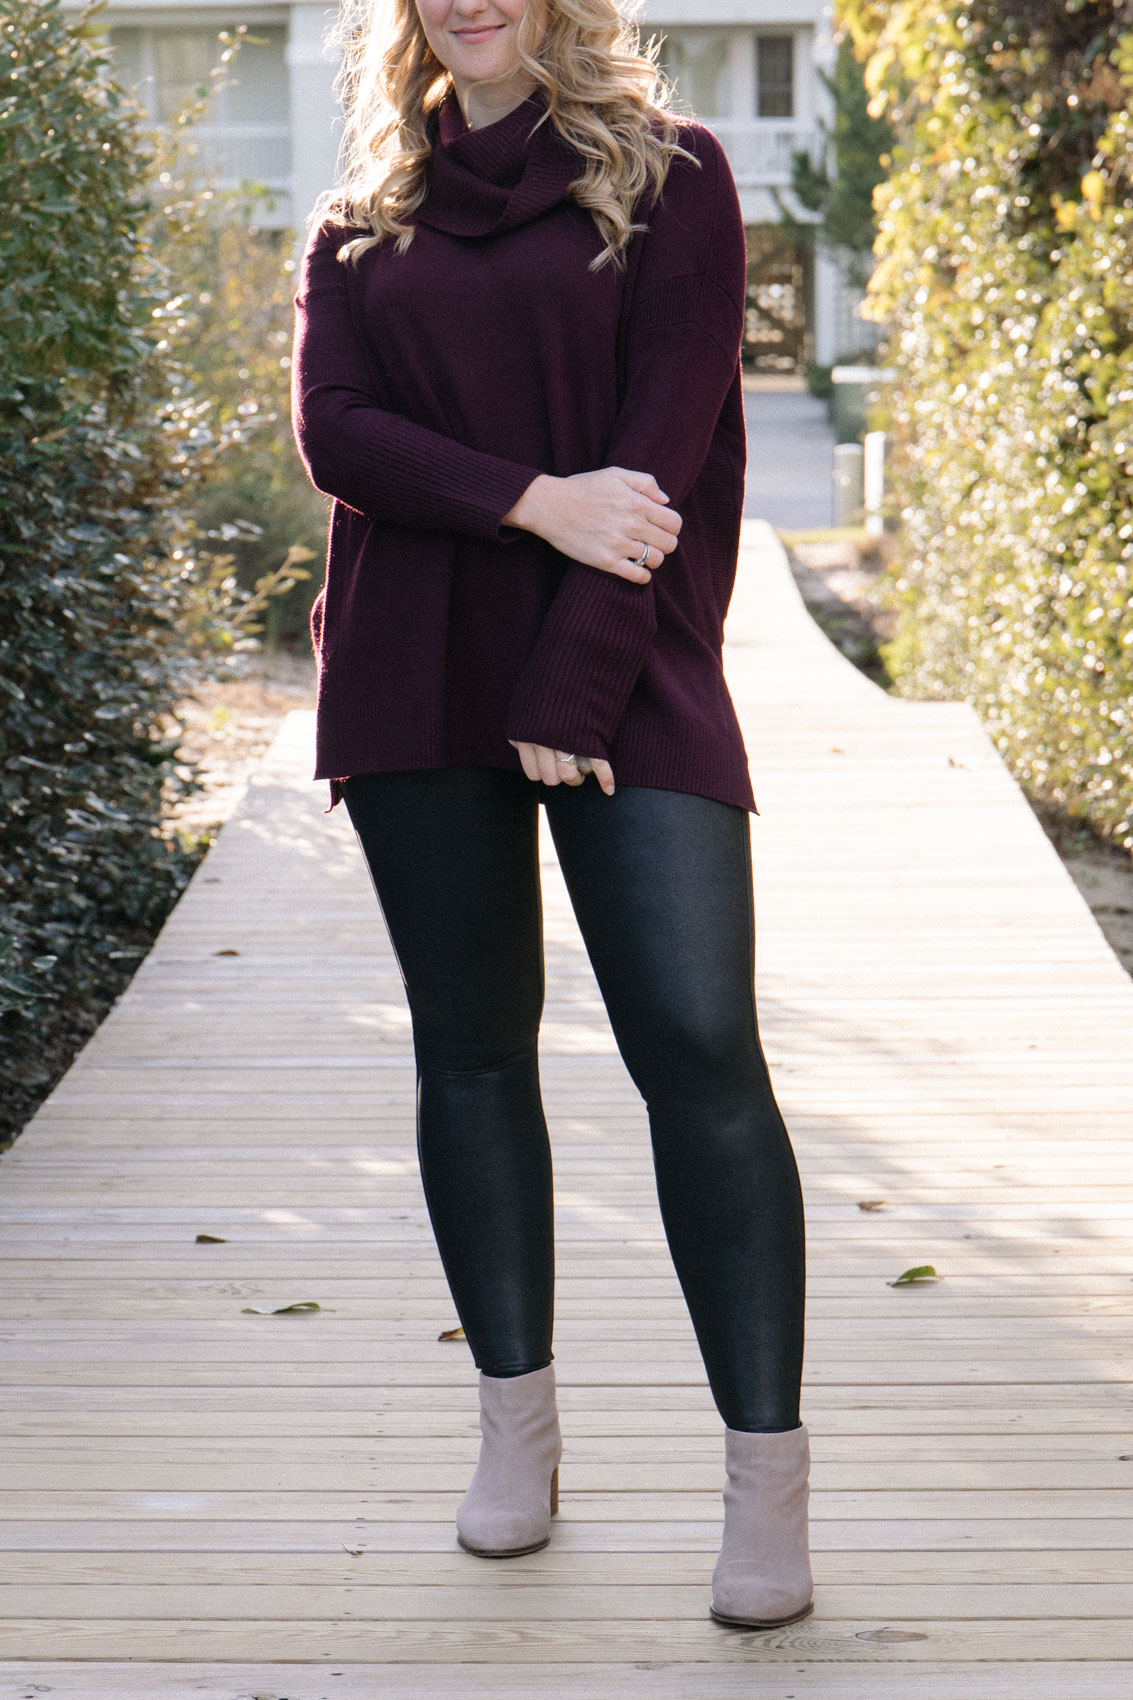 McElhinneys - 🚨 BACK IN STOCK Run, don't walk, our Spanx Leather look  Leggings are back and these styles always fly out 🚨 Shop in store or  online 👉🏻  Leather+Leggings